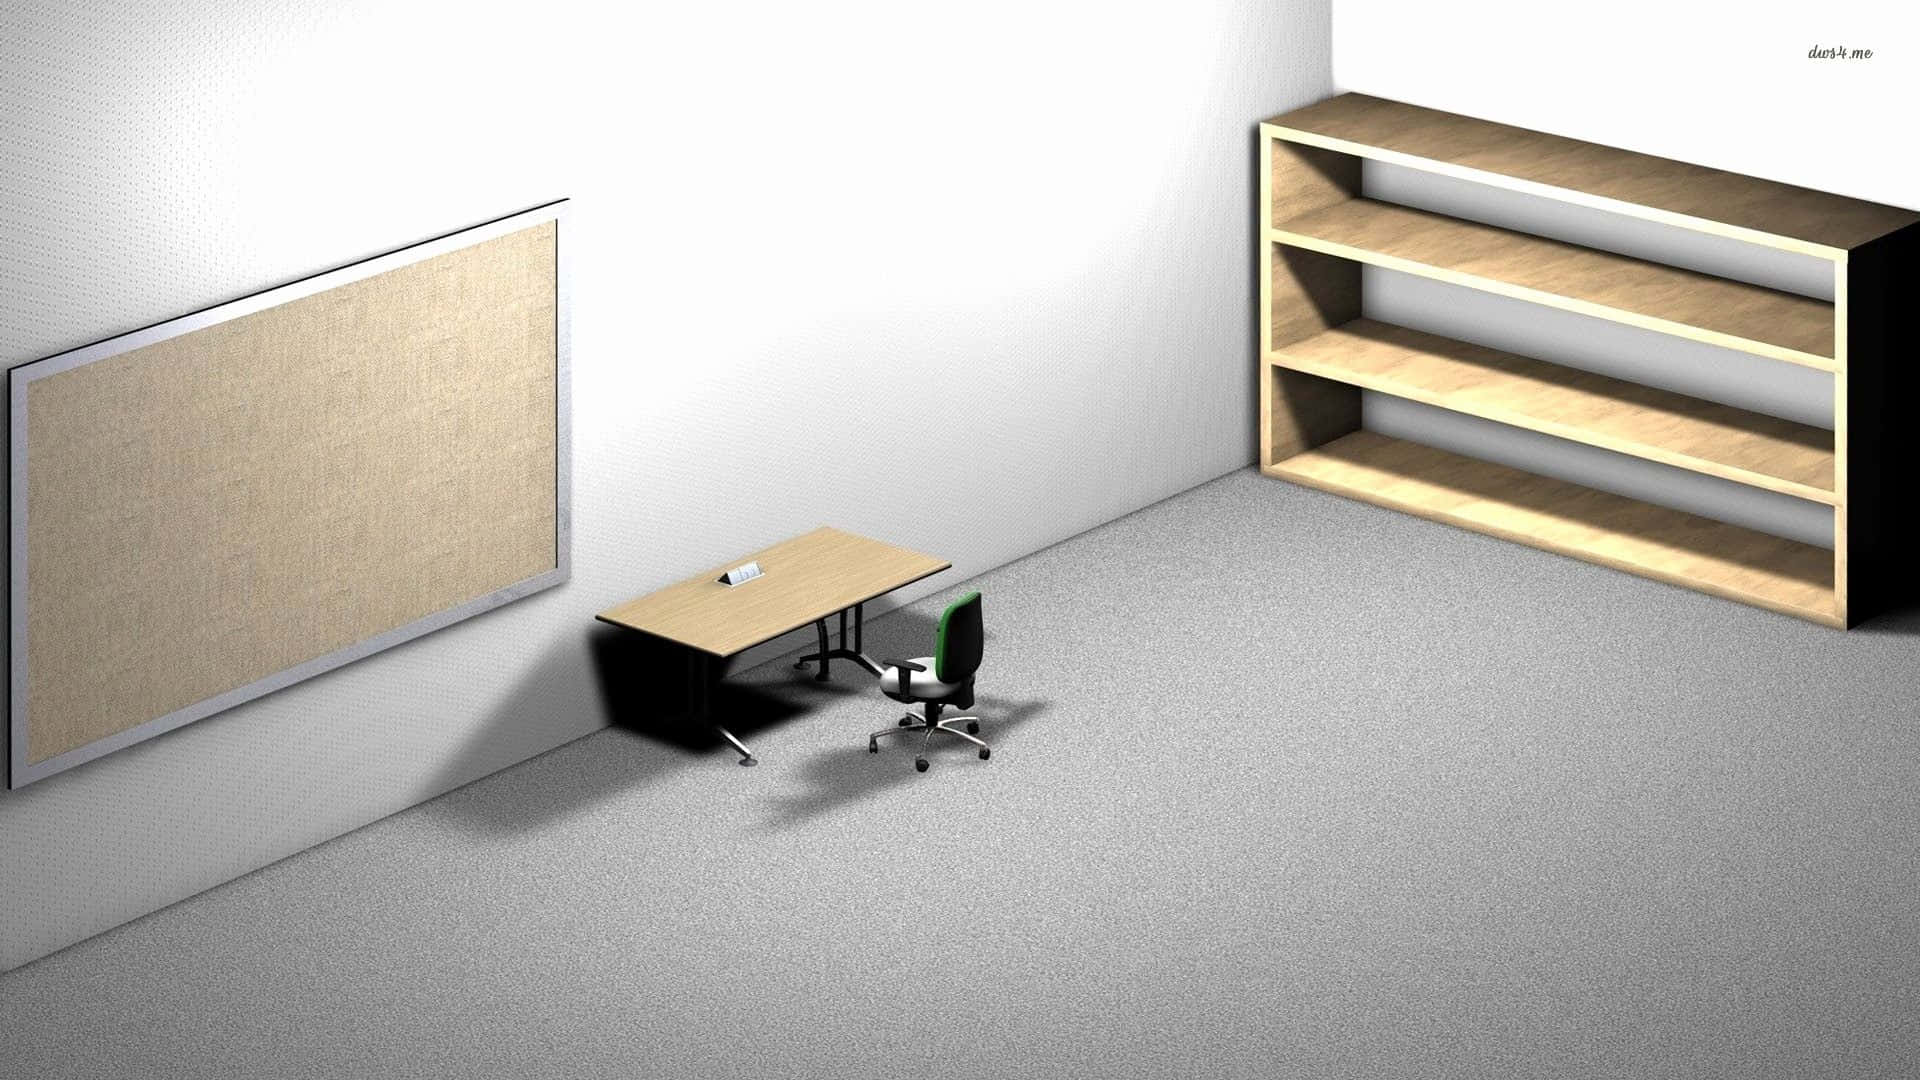 A 3d Model Of A Room With A Desk And A Shelf